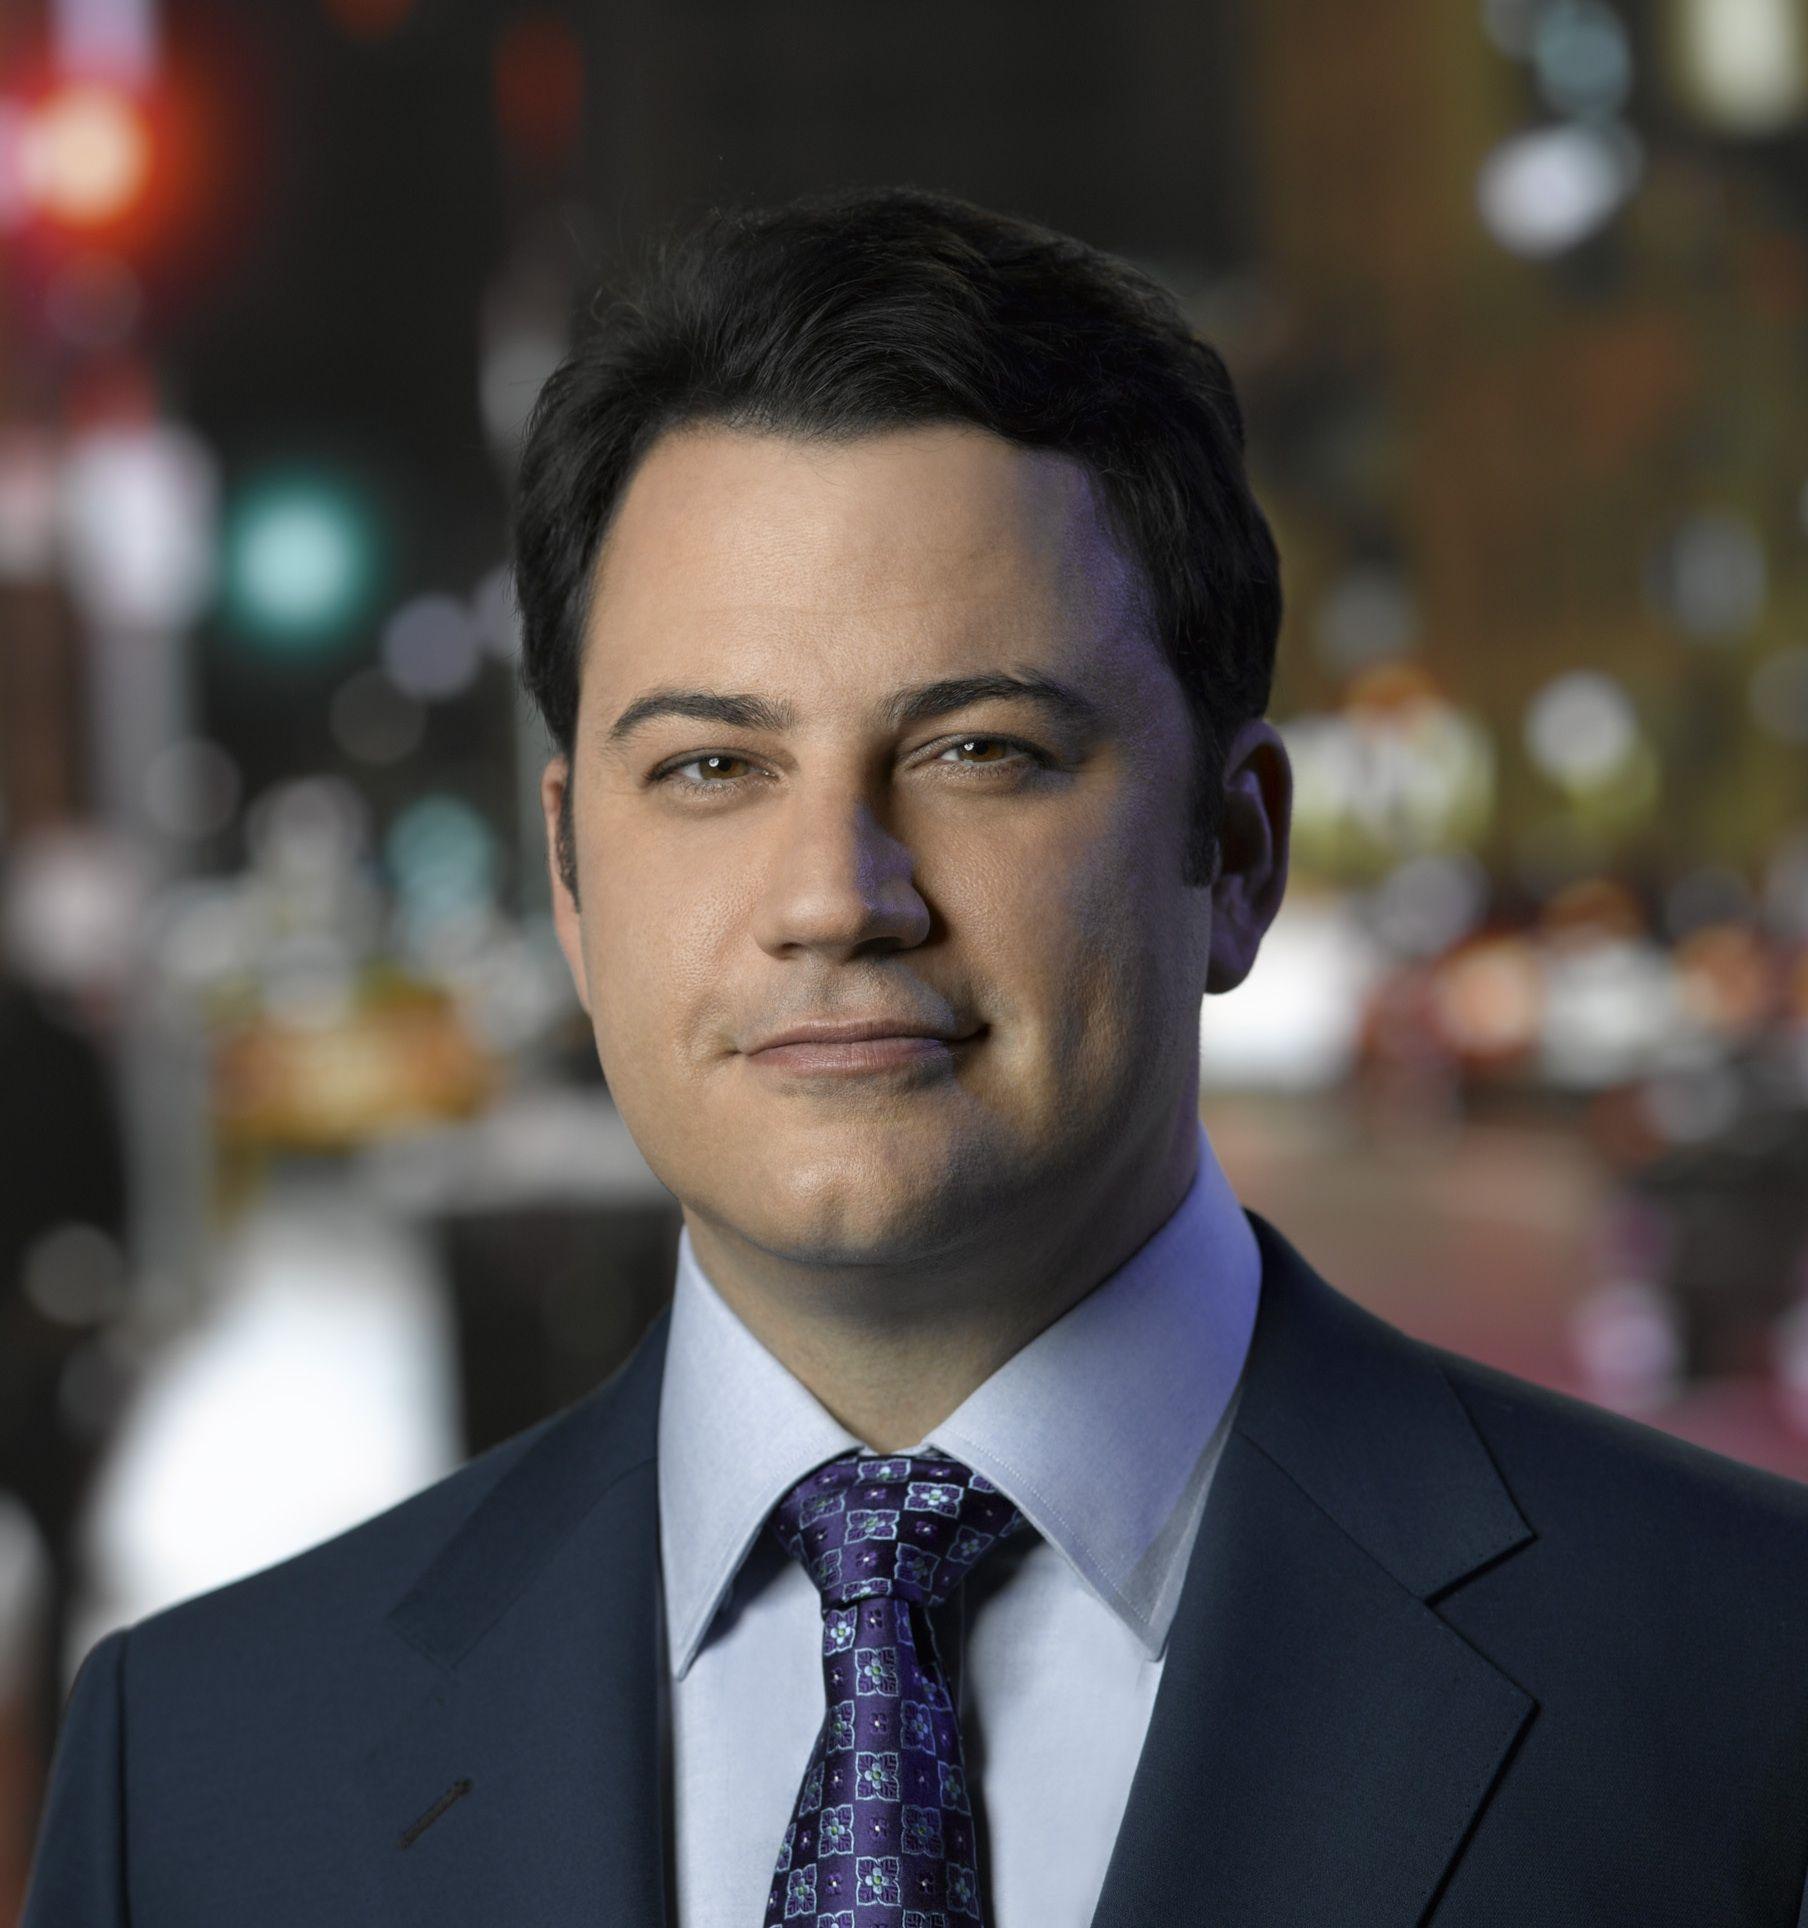 Jimmy Kimmel Signs New Two Year Deal With ABC For 'Jimmy Kimmel